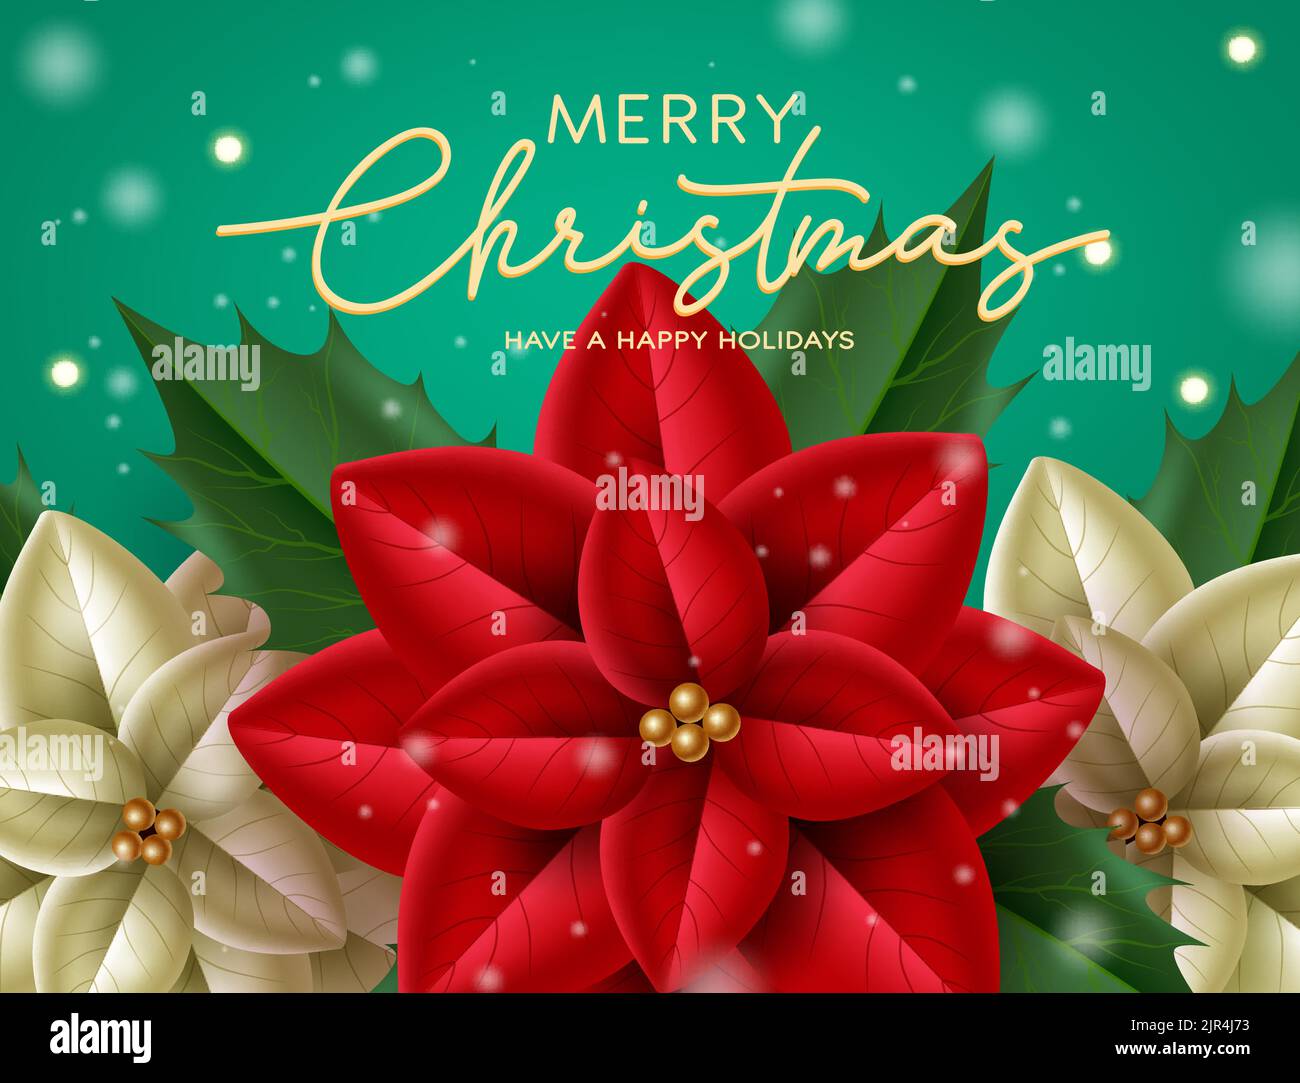 Merry christmas greeting vector design. Merry christmas text with elegant poinsettia flowers with snow and bokeh elements for holiday season flower. Stock Vector